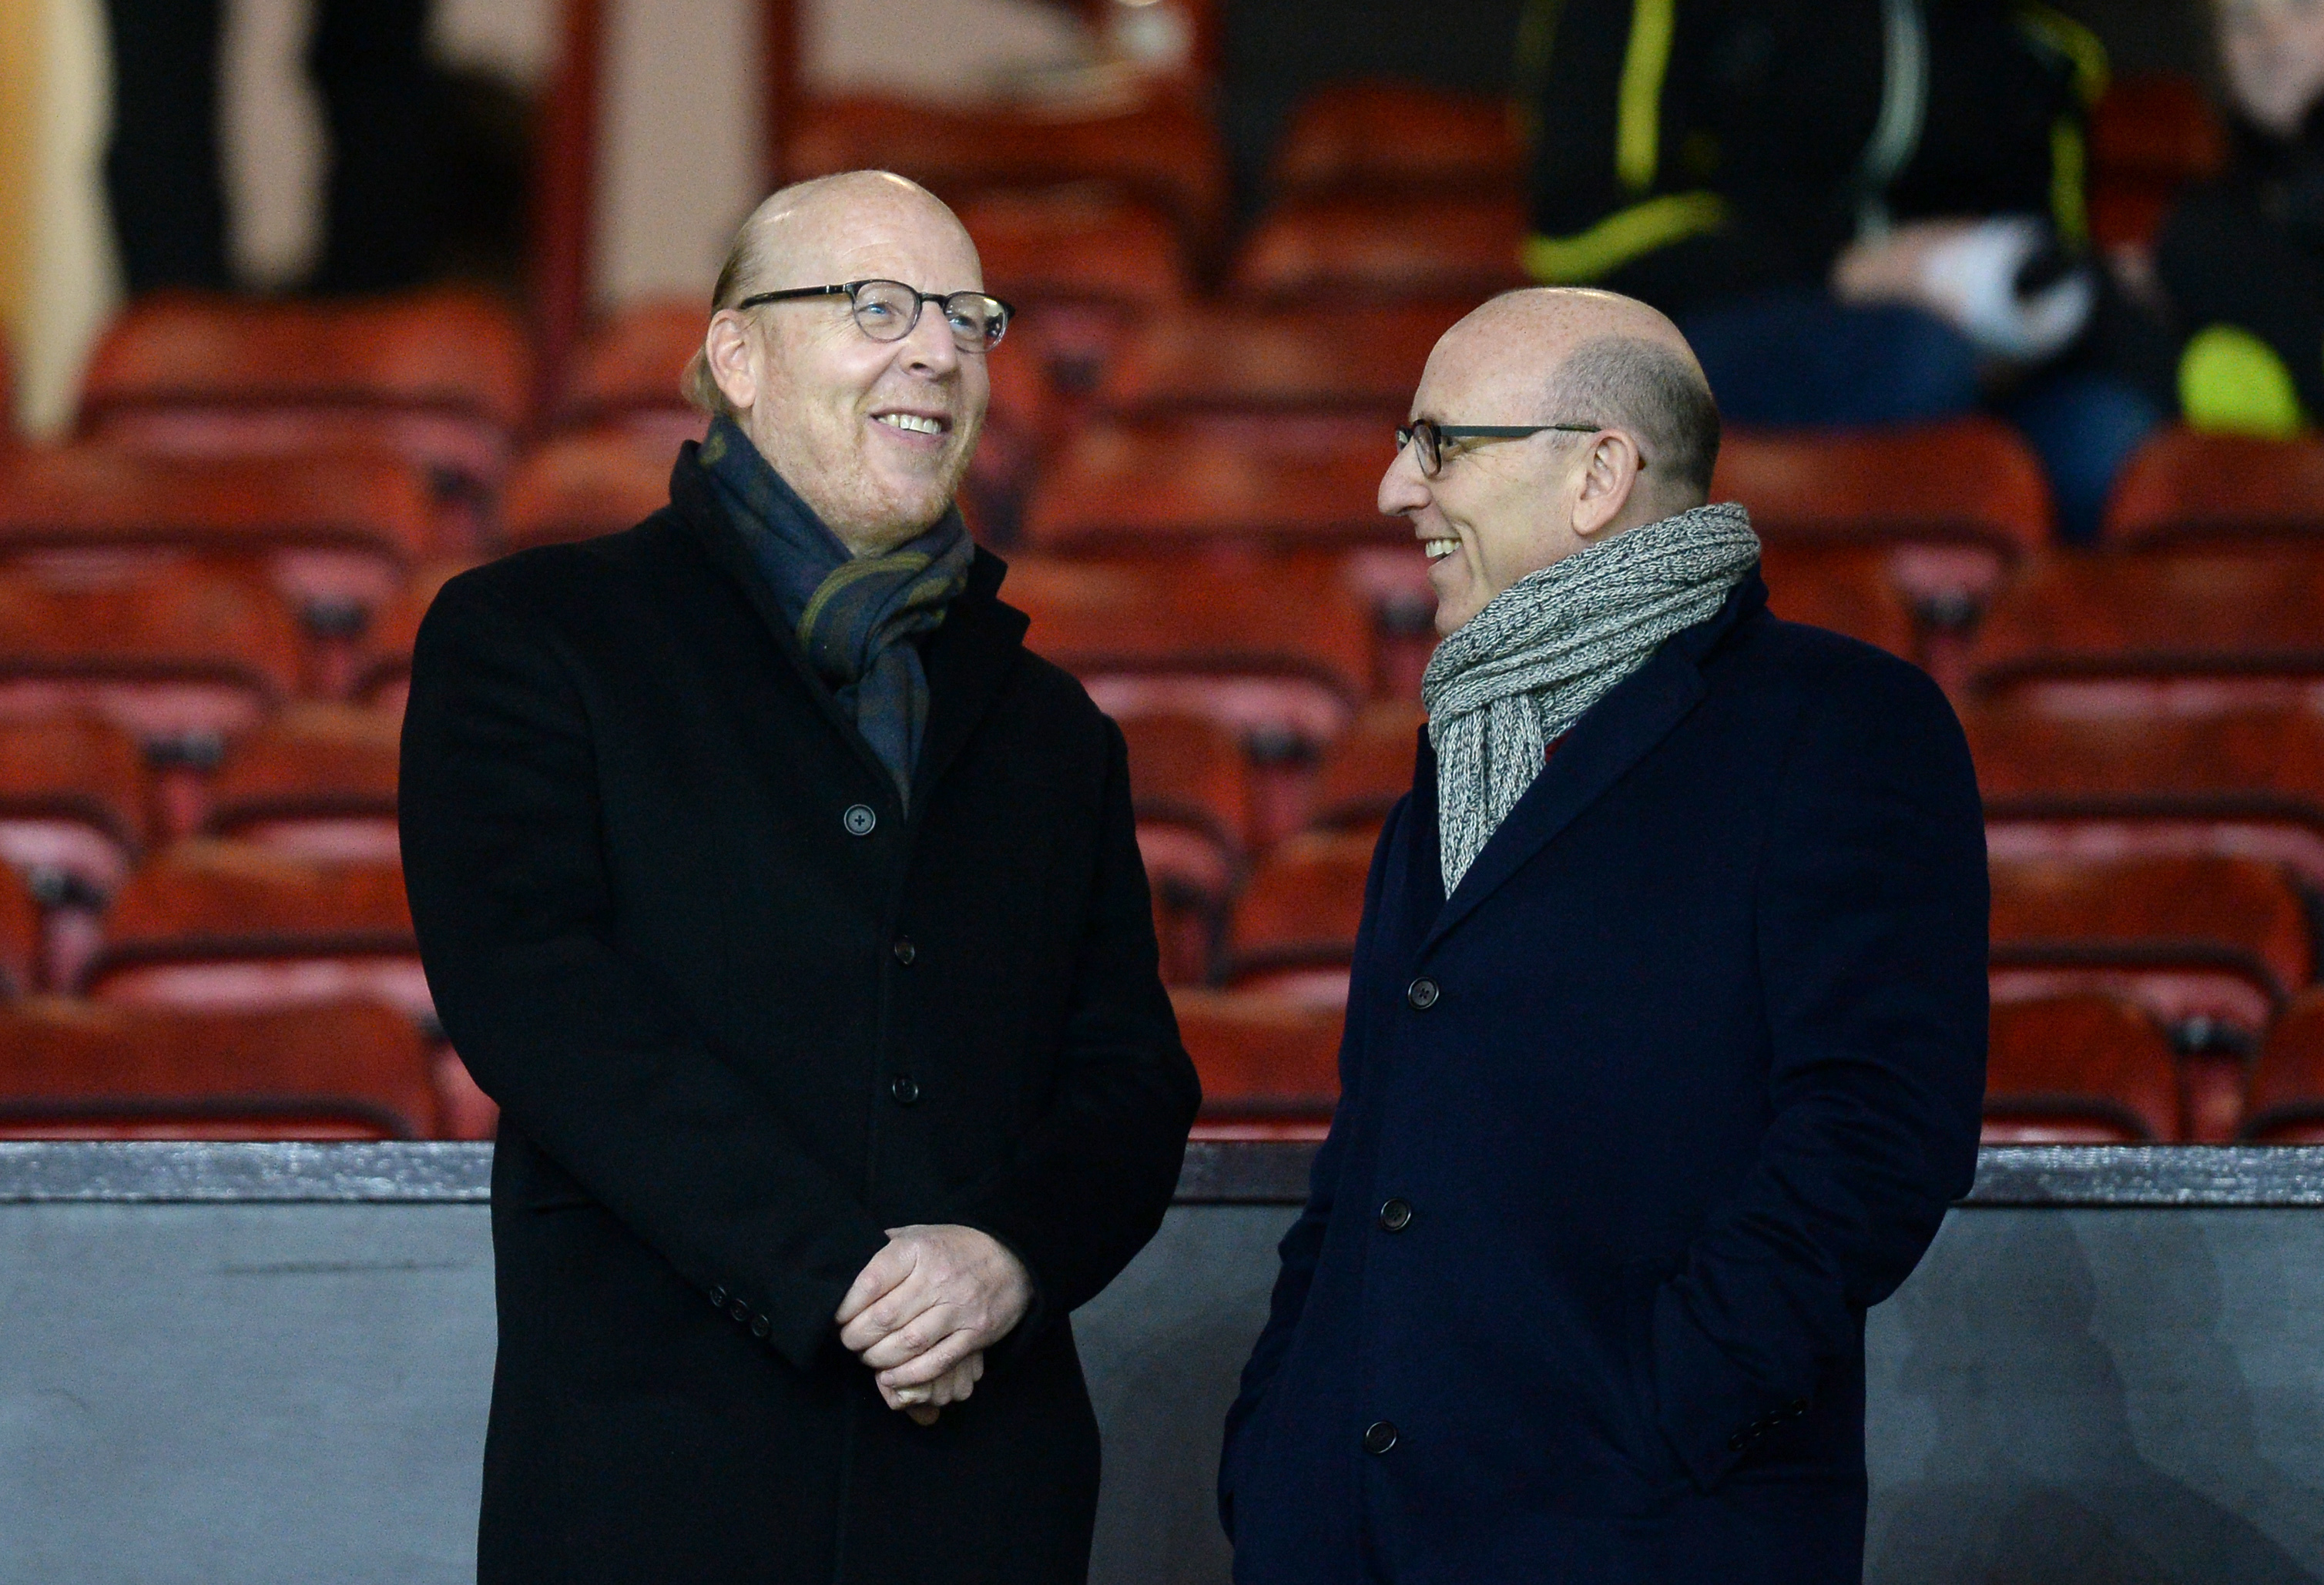 Manchester United joint chairmen Joel Glazer (right) and Avram Glazer (left) in the stands